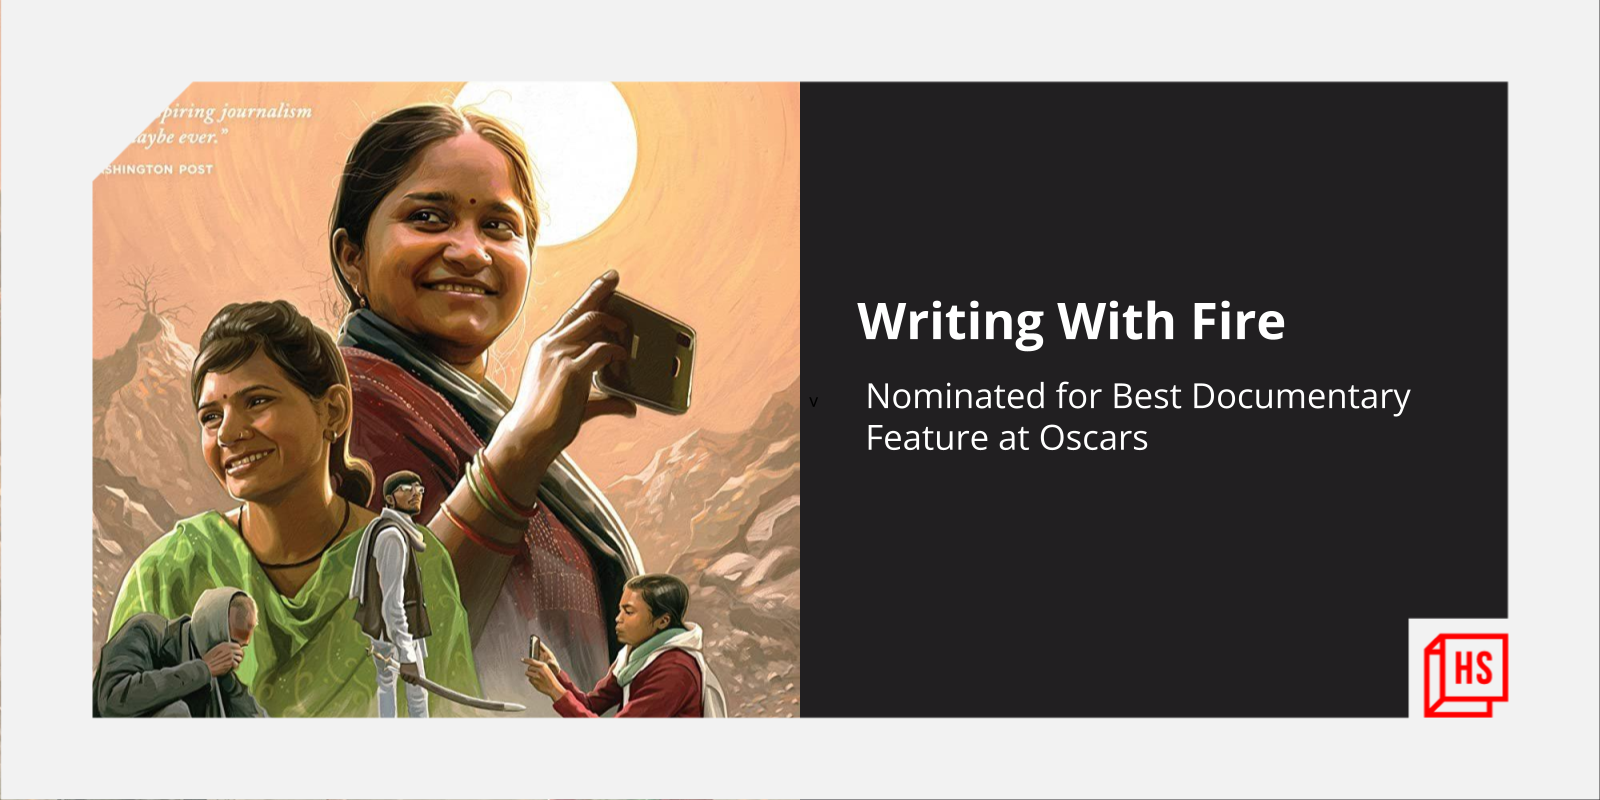 India's Writing With Fire nominated for Best Documentary Feature at Oscars